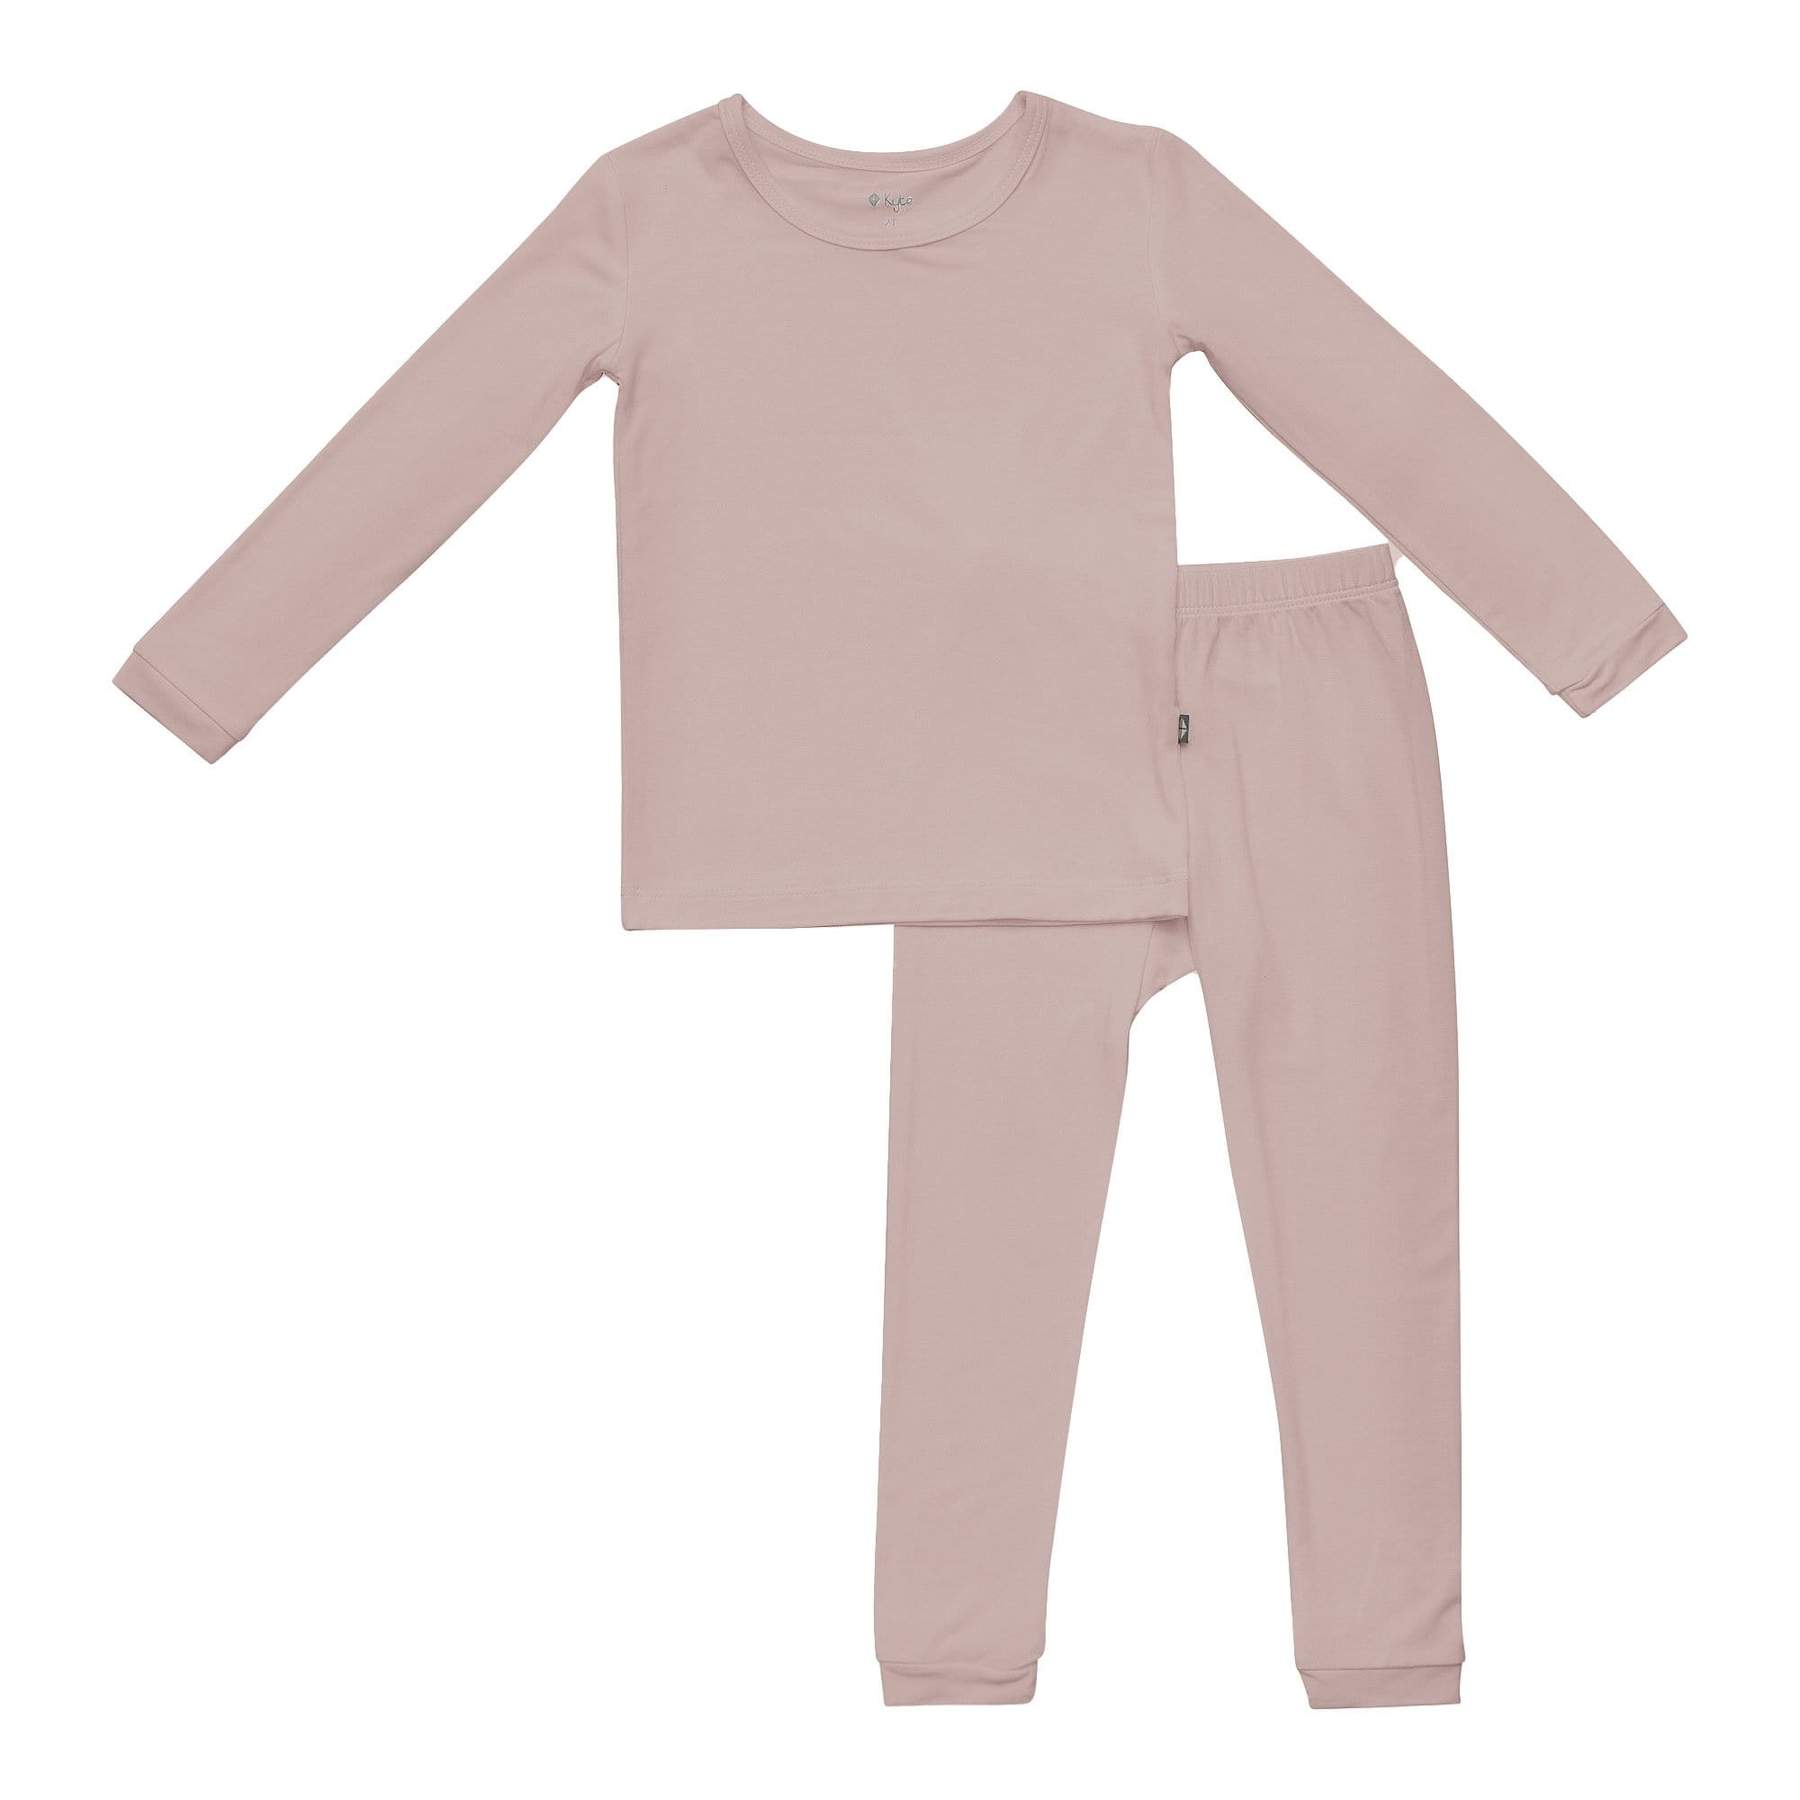 Kyte BABY Toddler Pajama Set in Sunset – Blossom